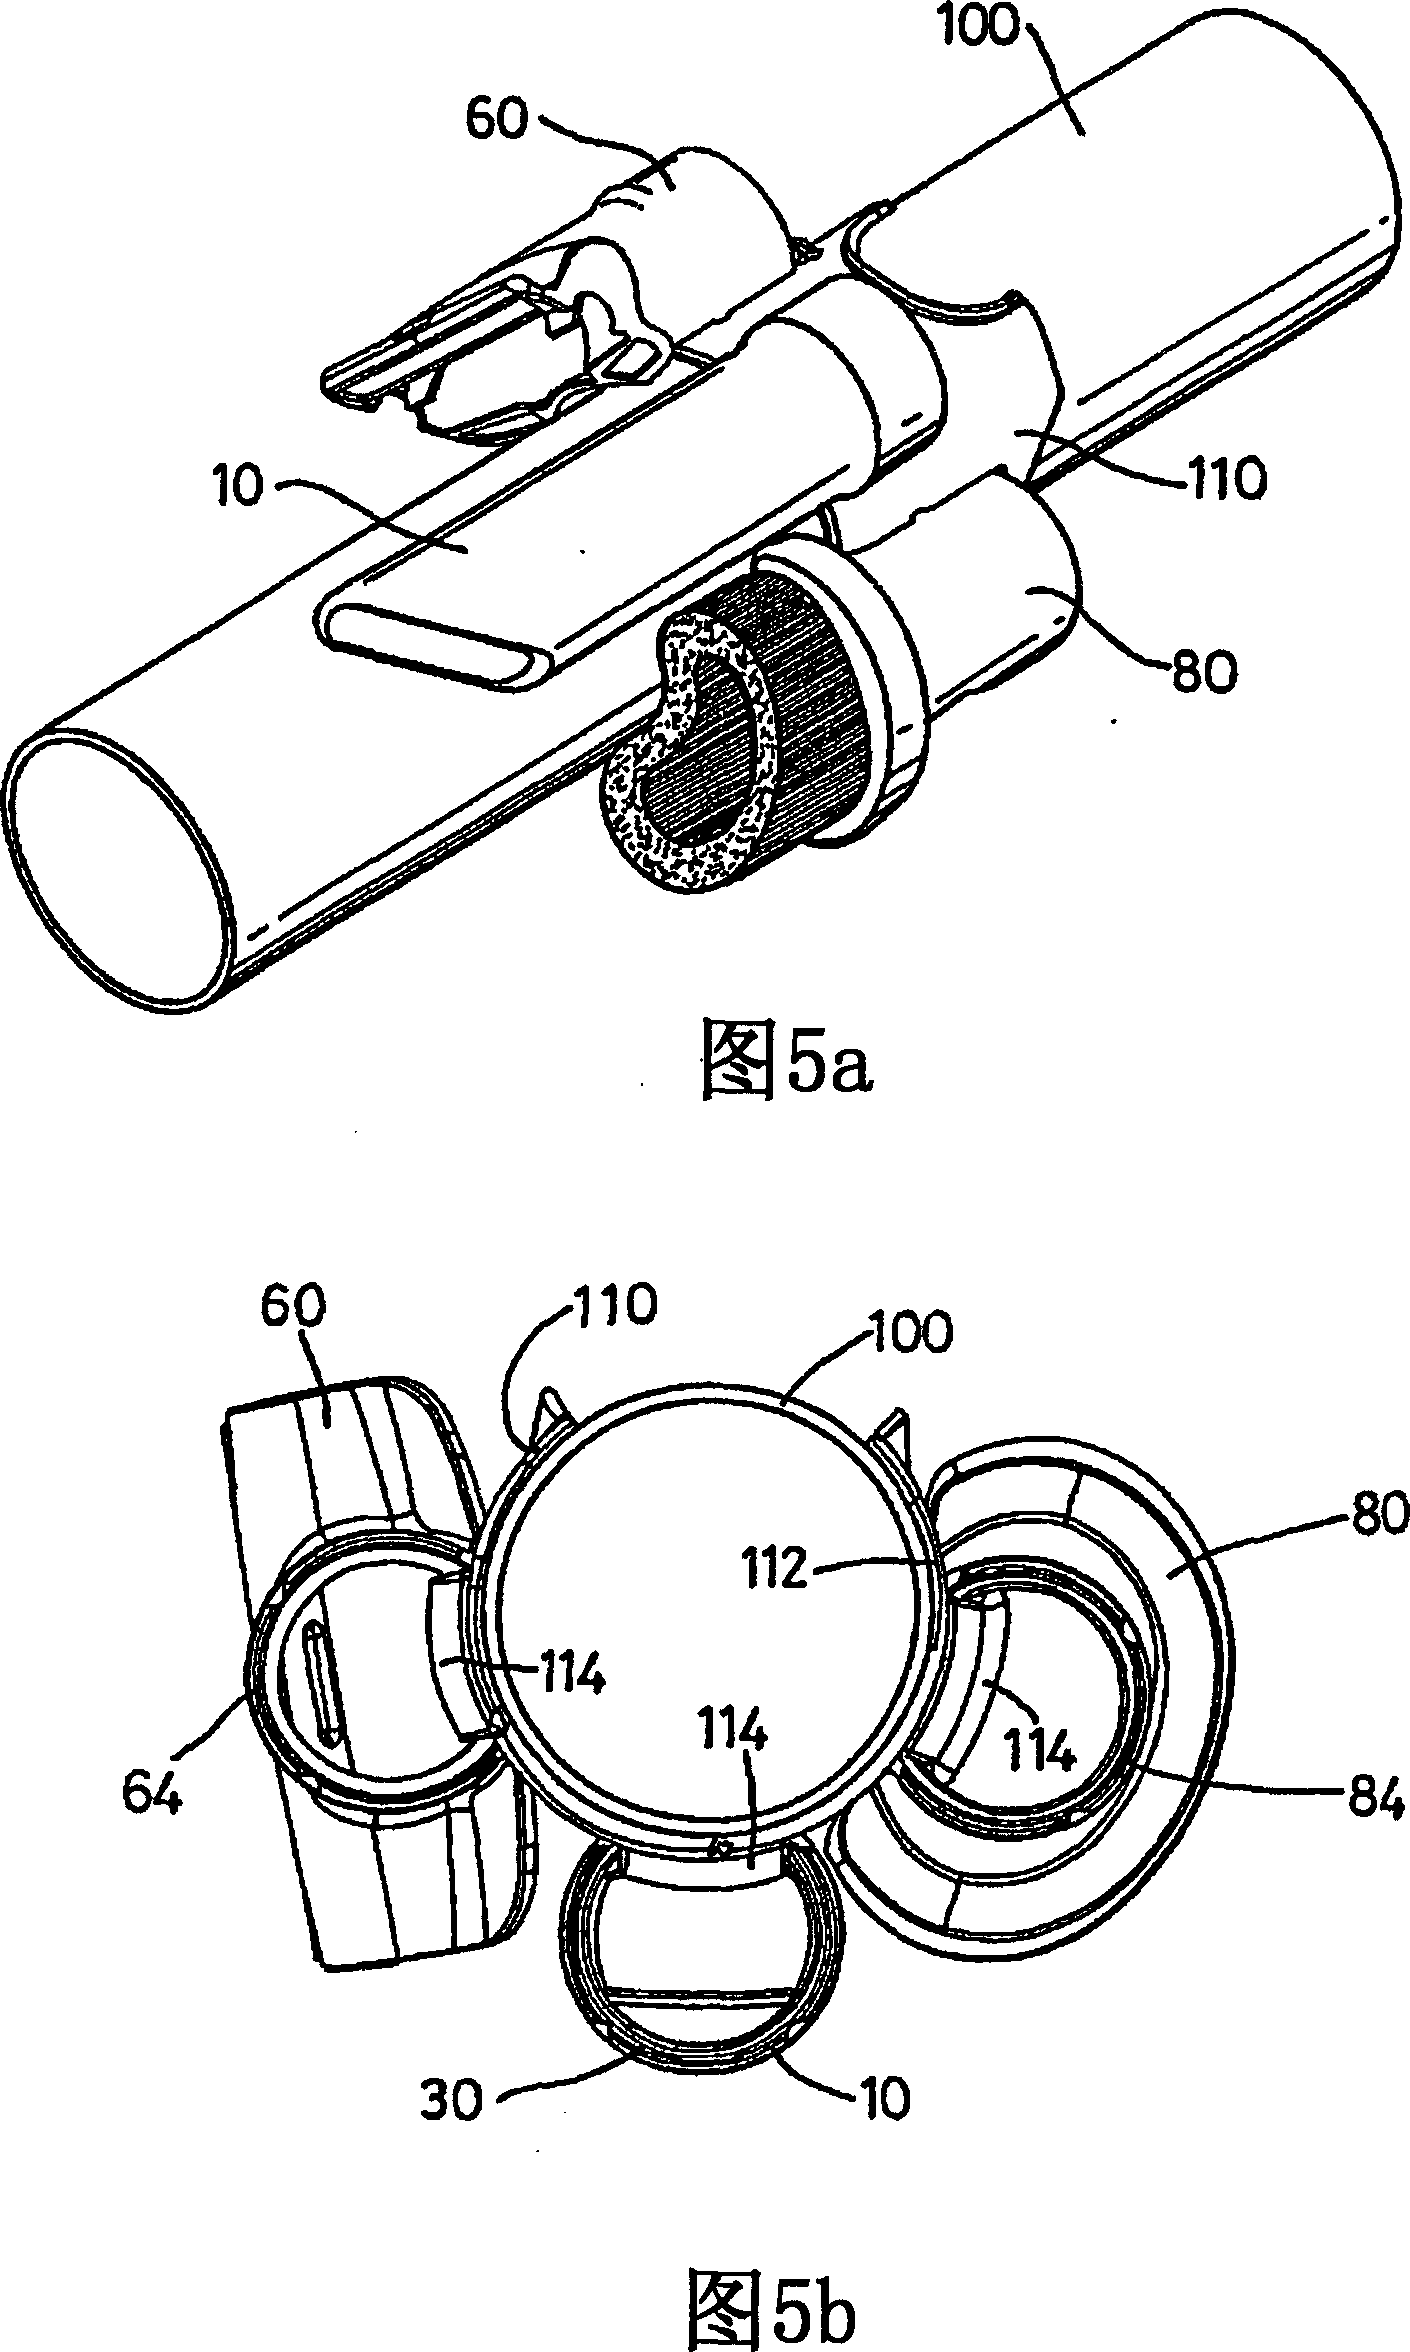 An attachment for a cleaning appliance